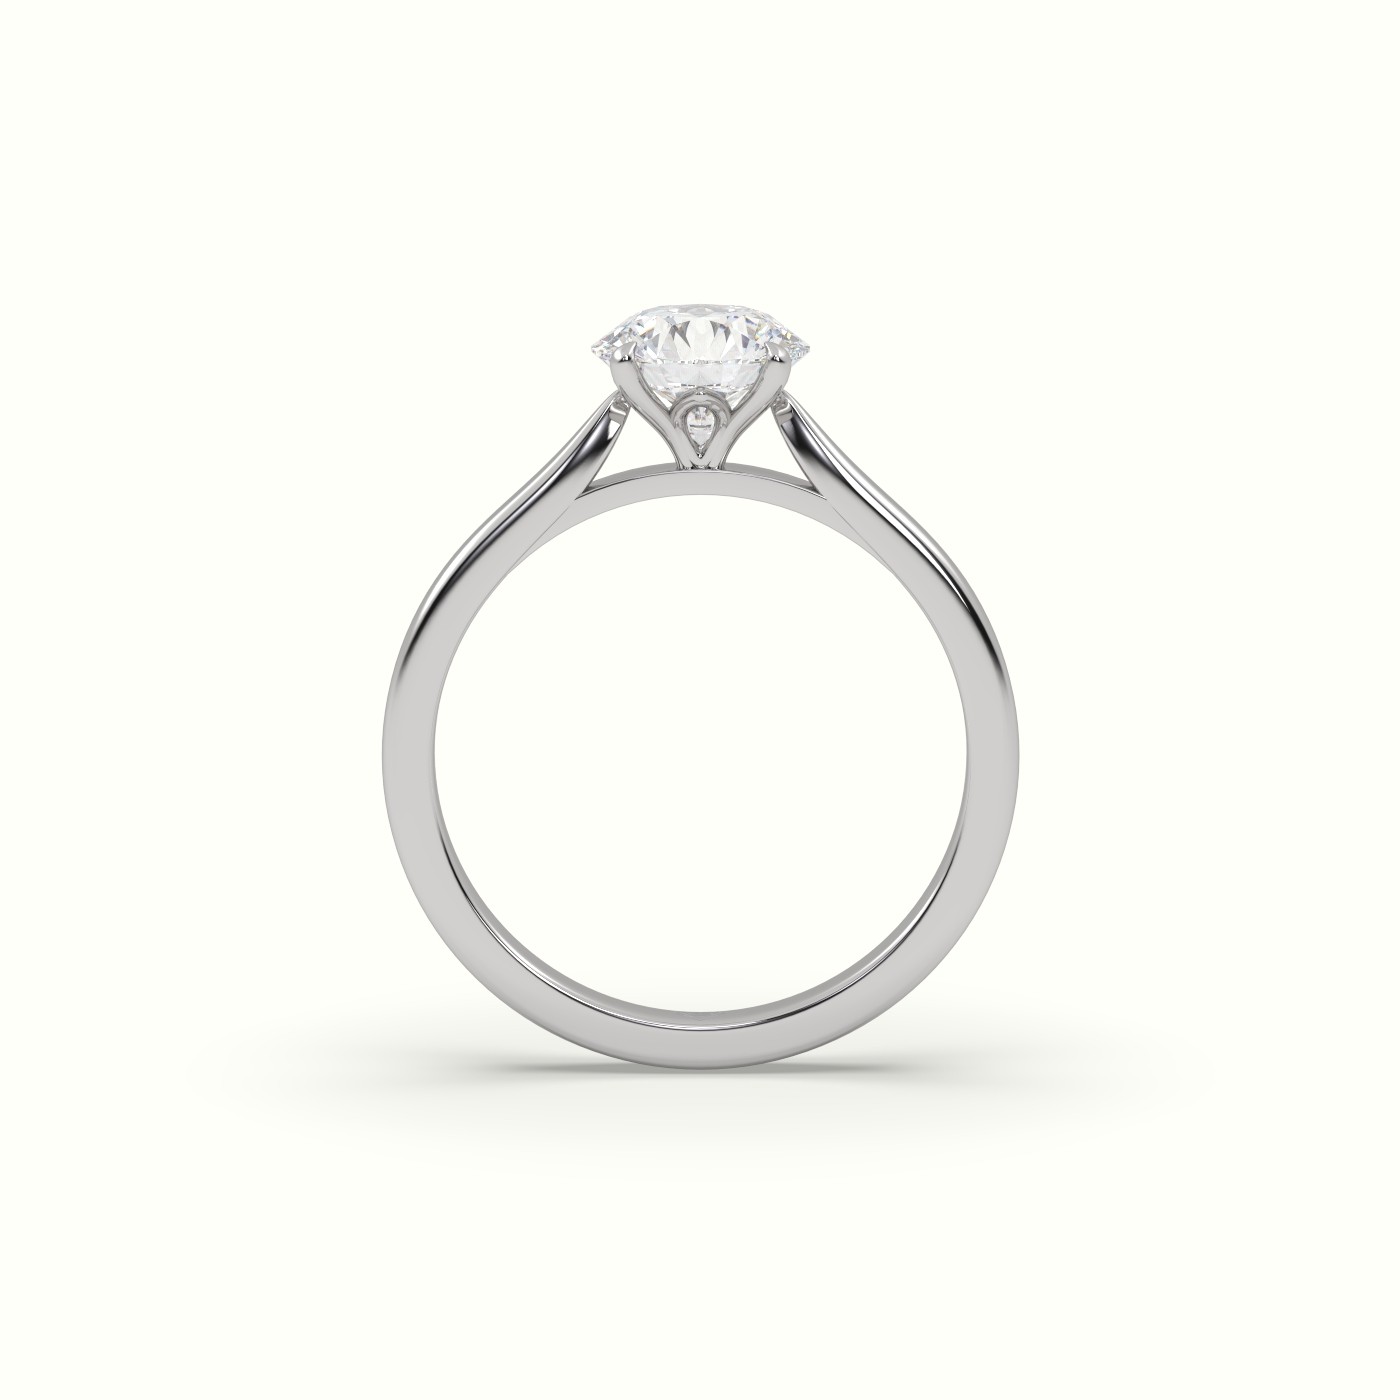 18K White Gold Round Solitaire Diamond 4 prongs Engagement Ring - Precious Jewels Antwerp Elegance